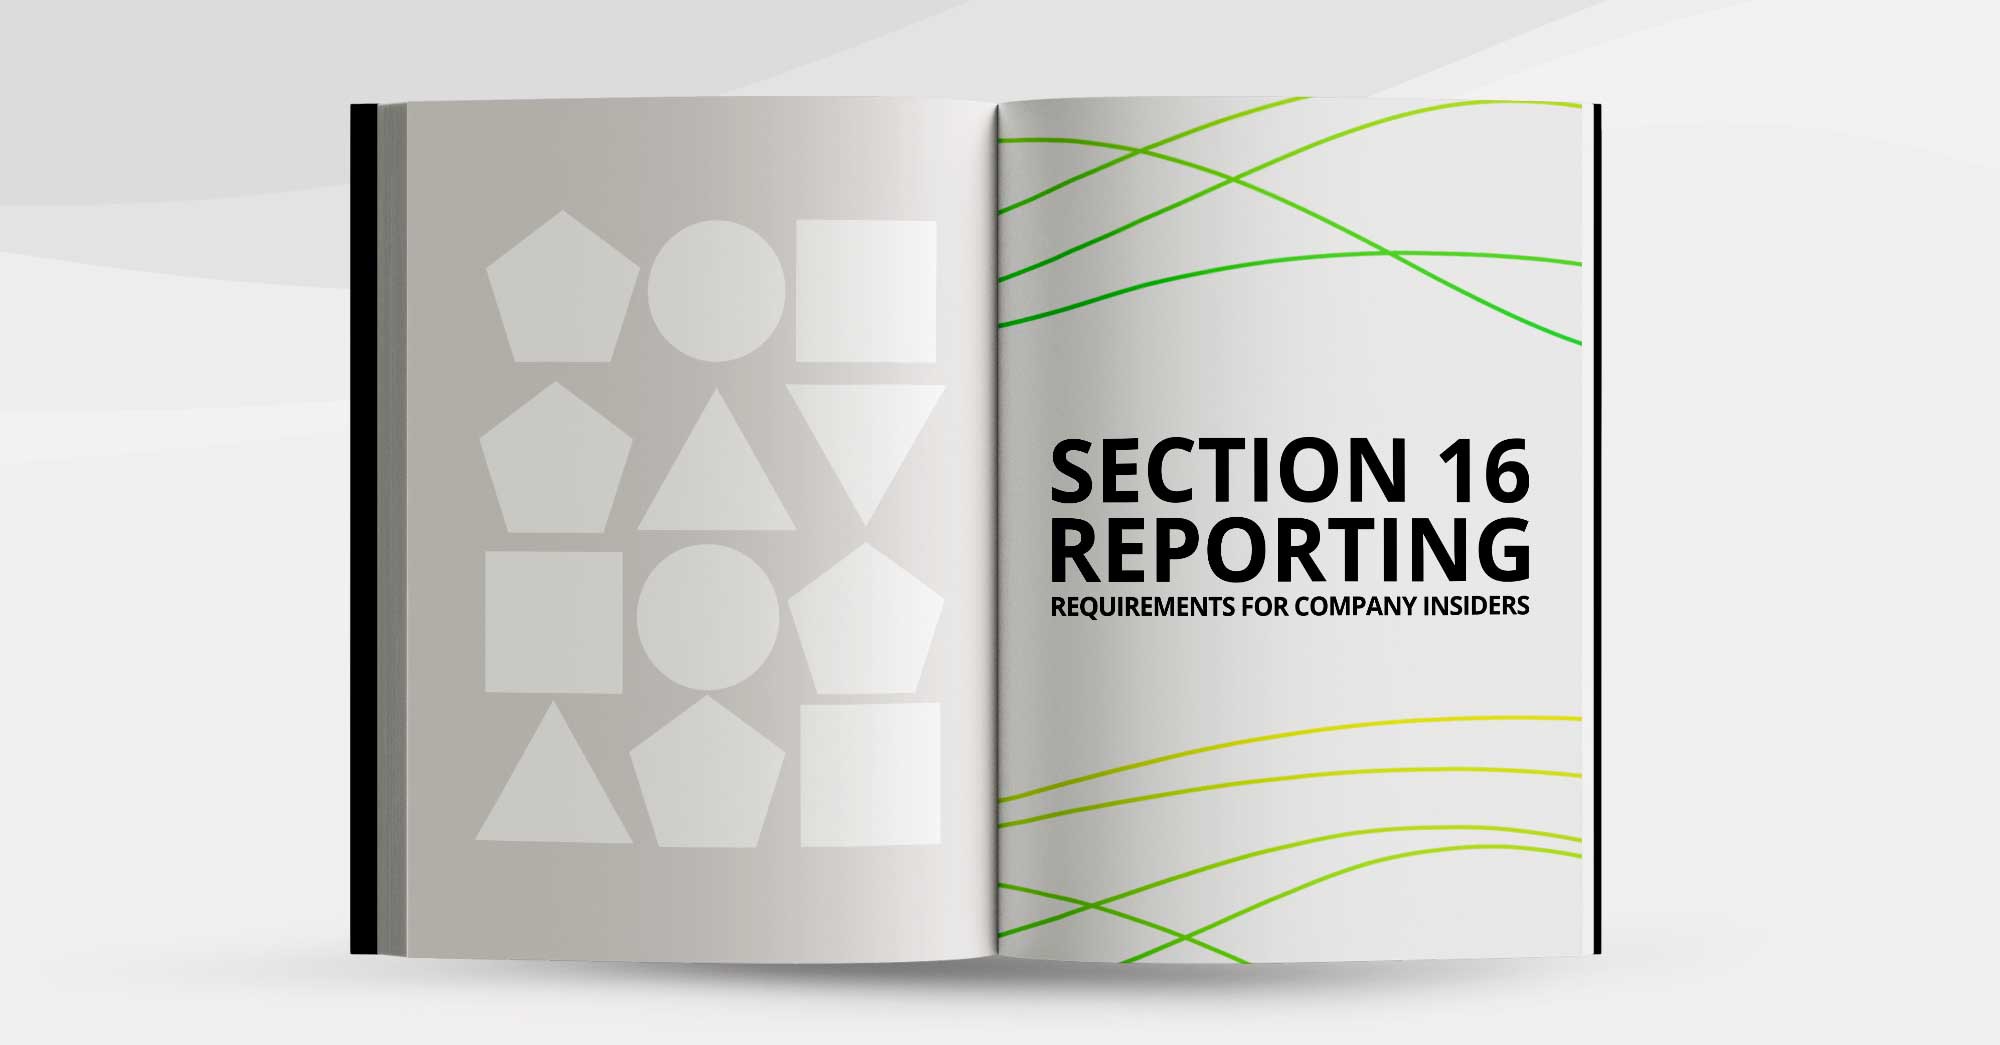 Section 16 Reporting Requirements for Company Insiders